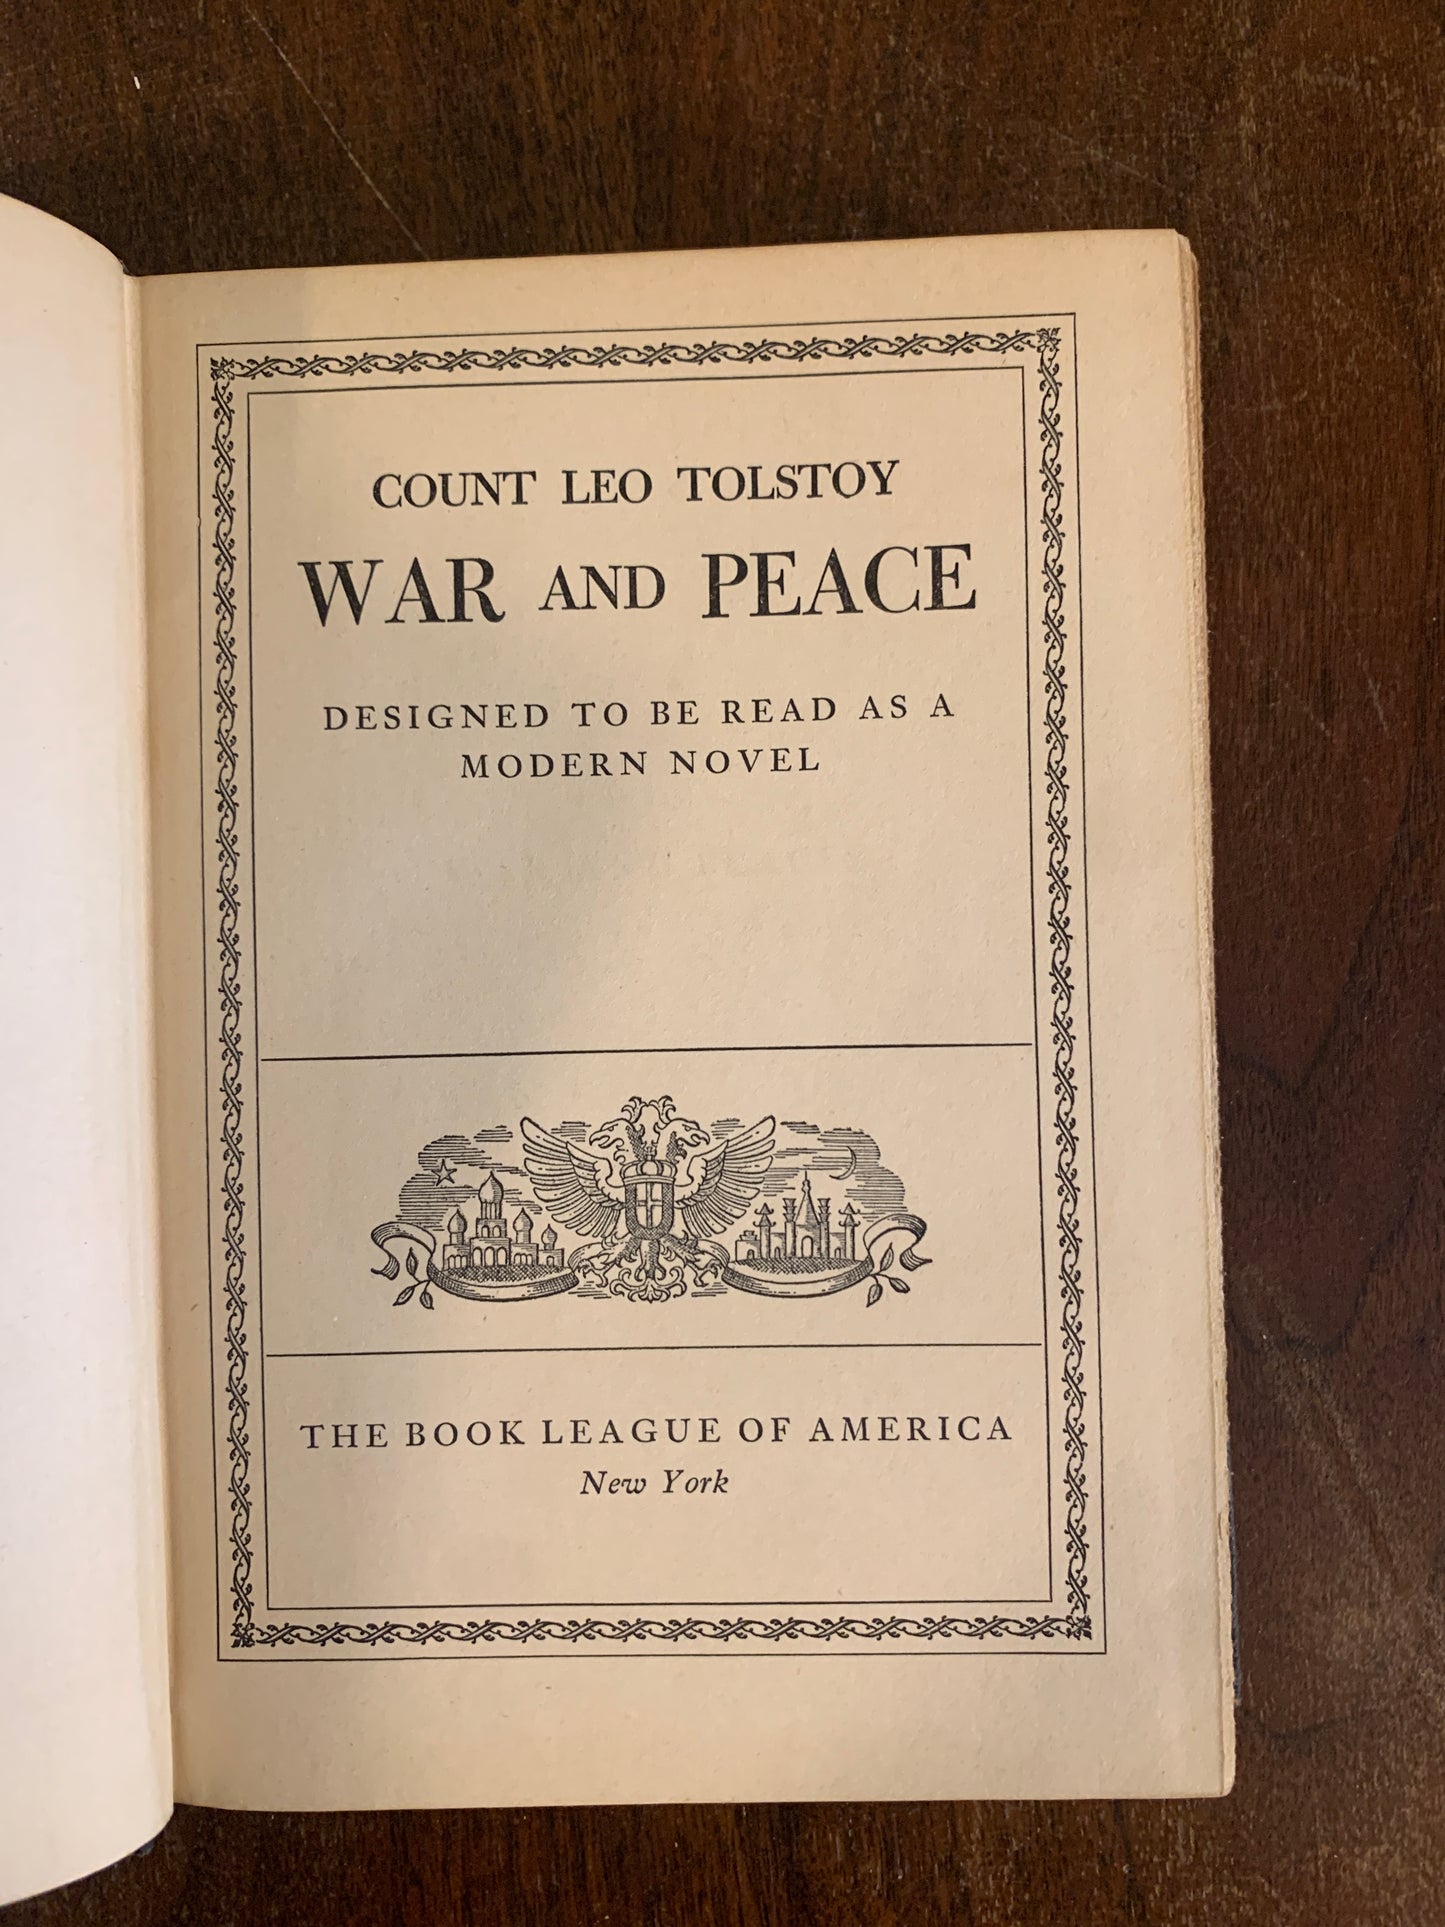 War and Peace by Count Leo Tolstoy, Book League of America